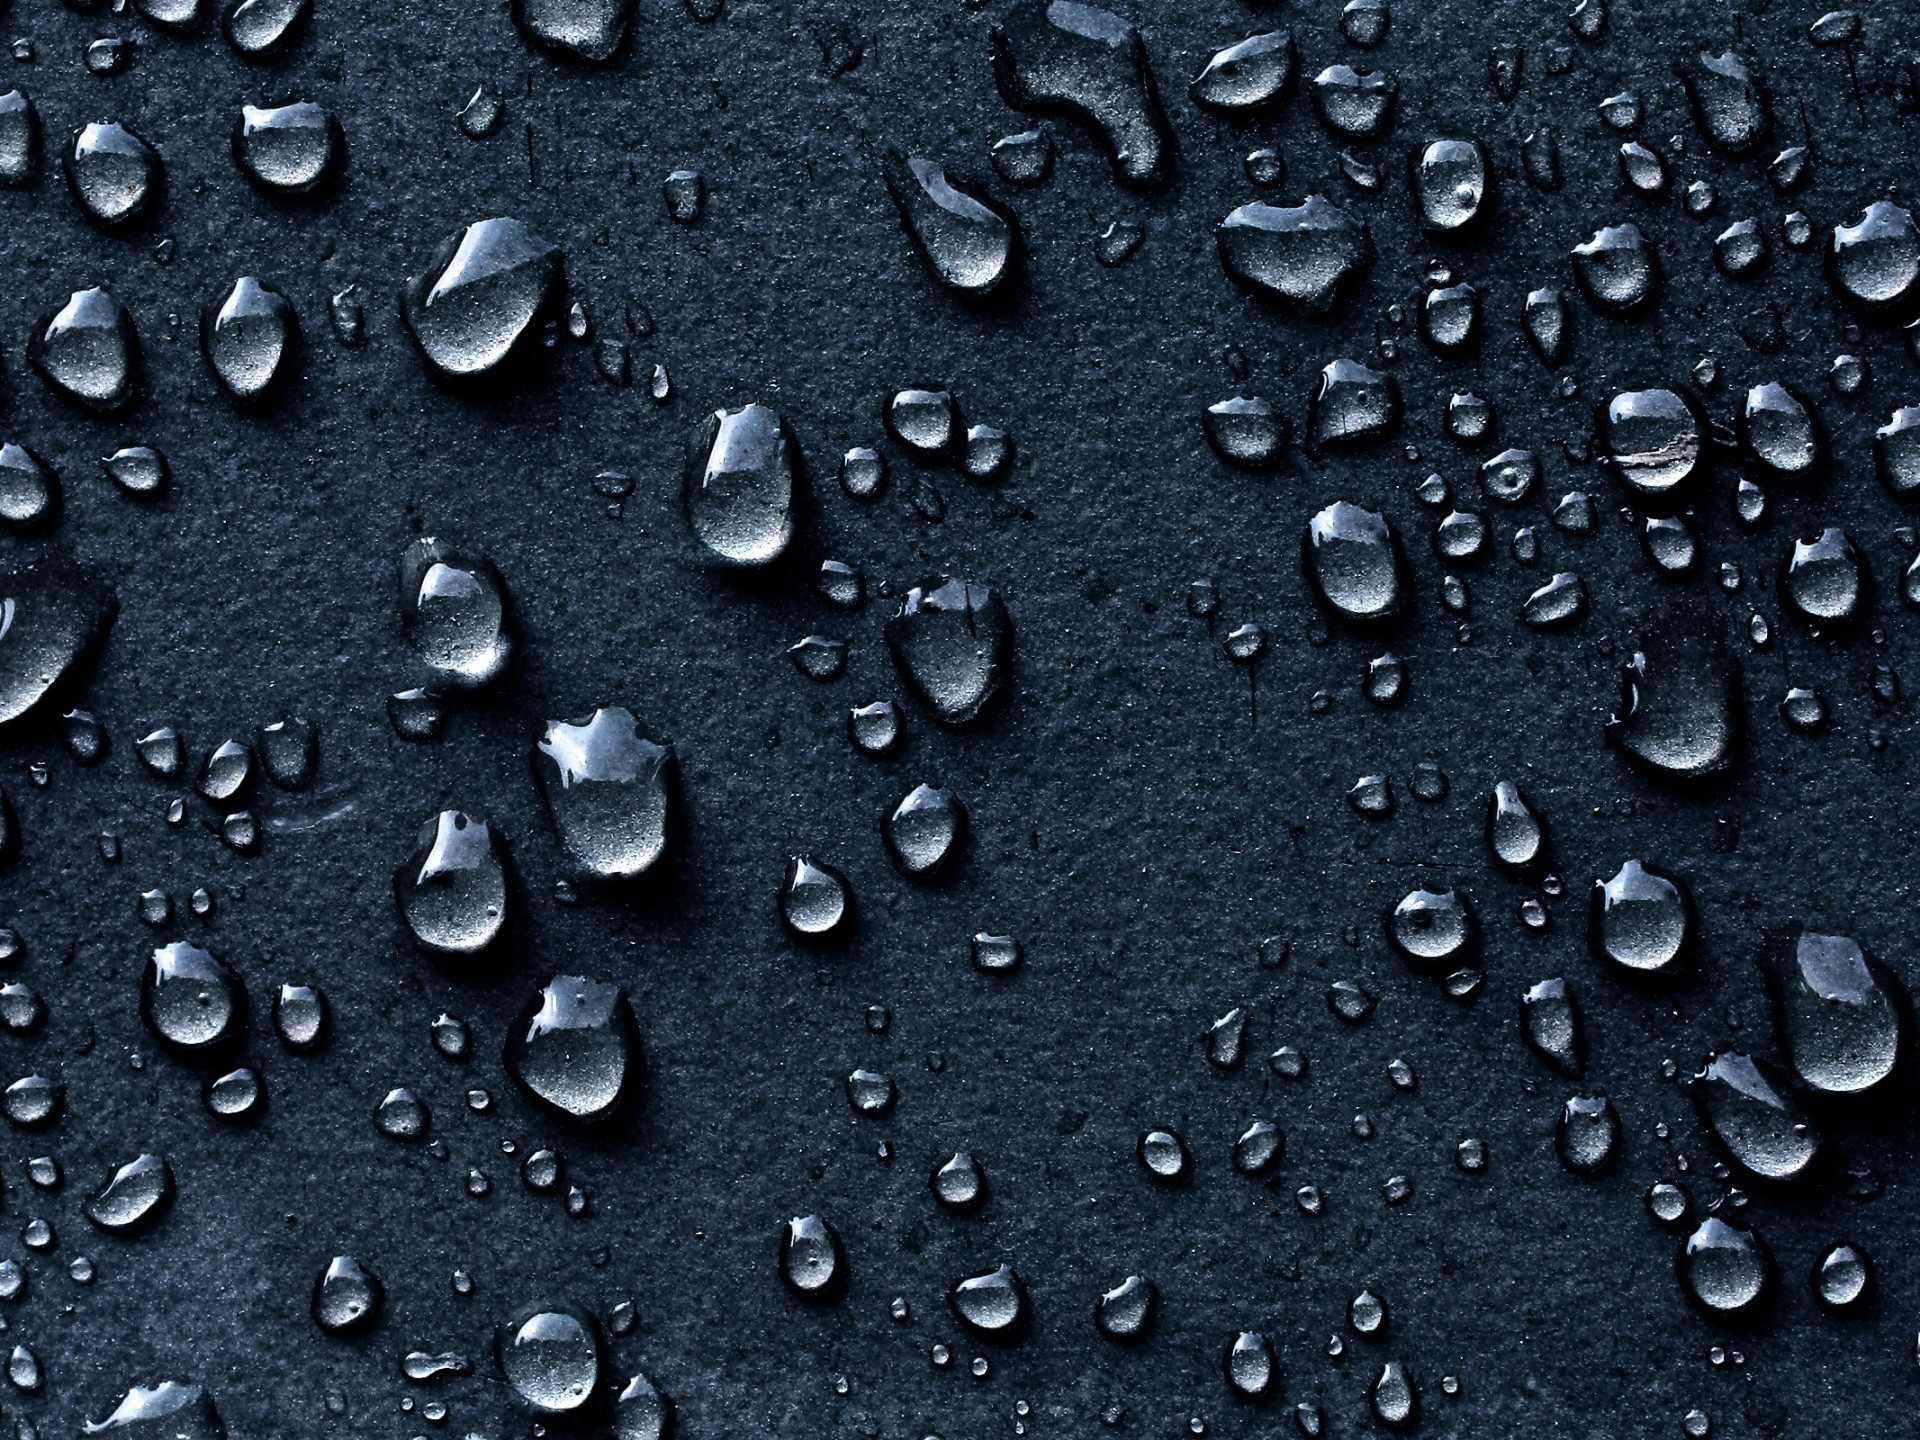 1920x1440 Water droplets background